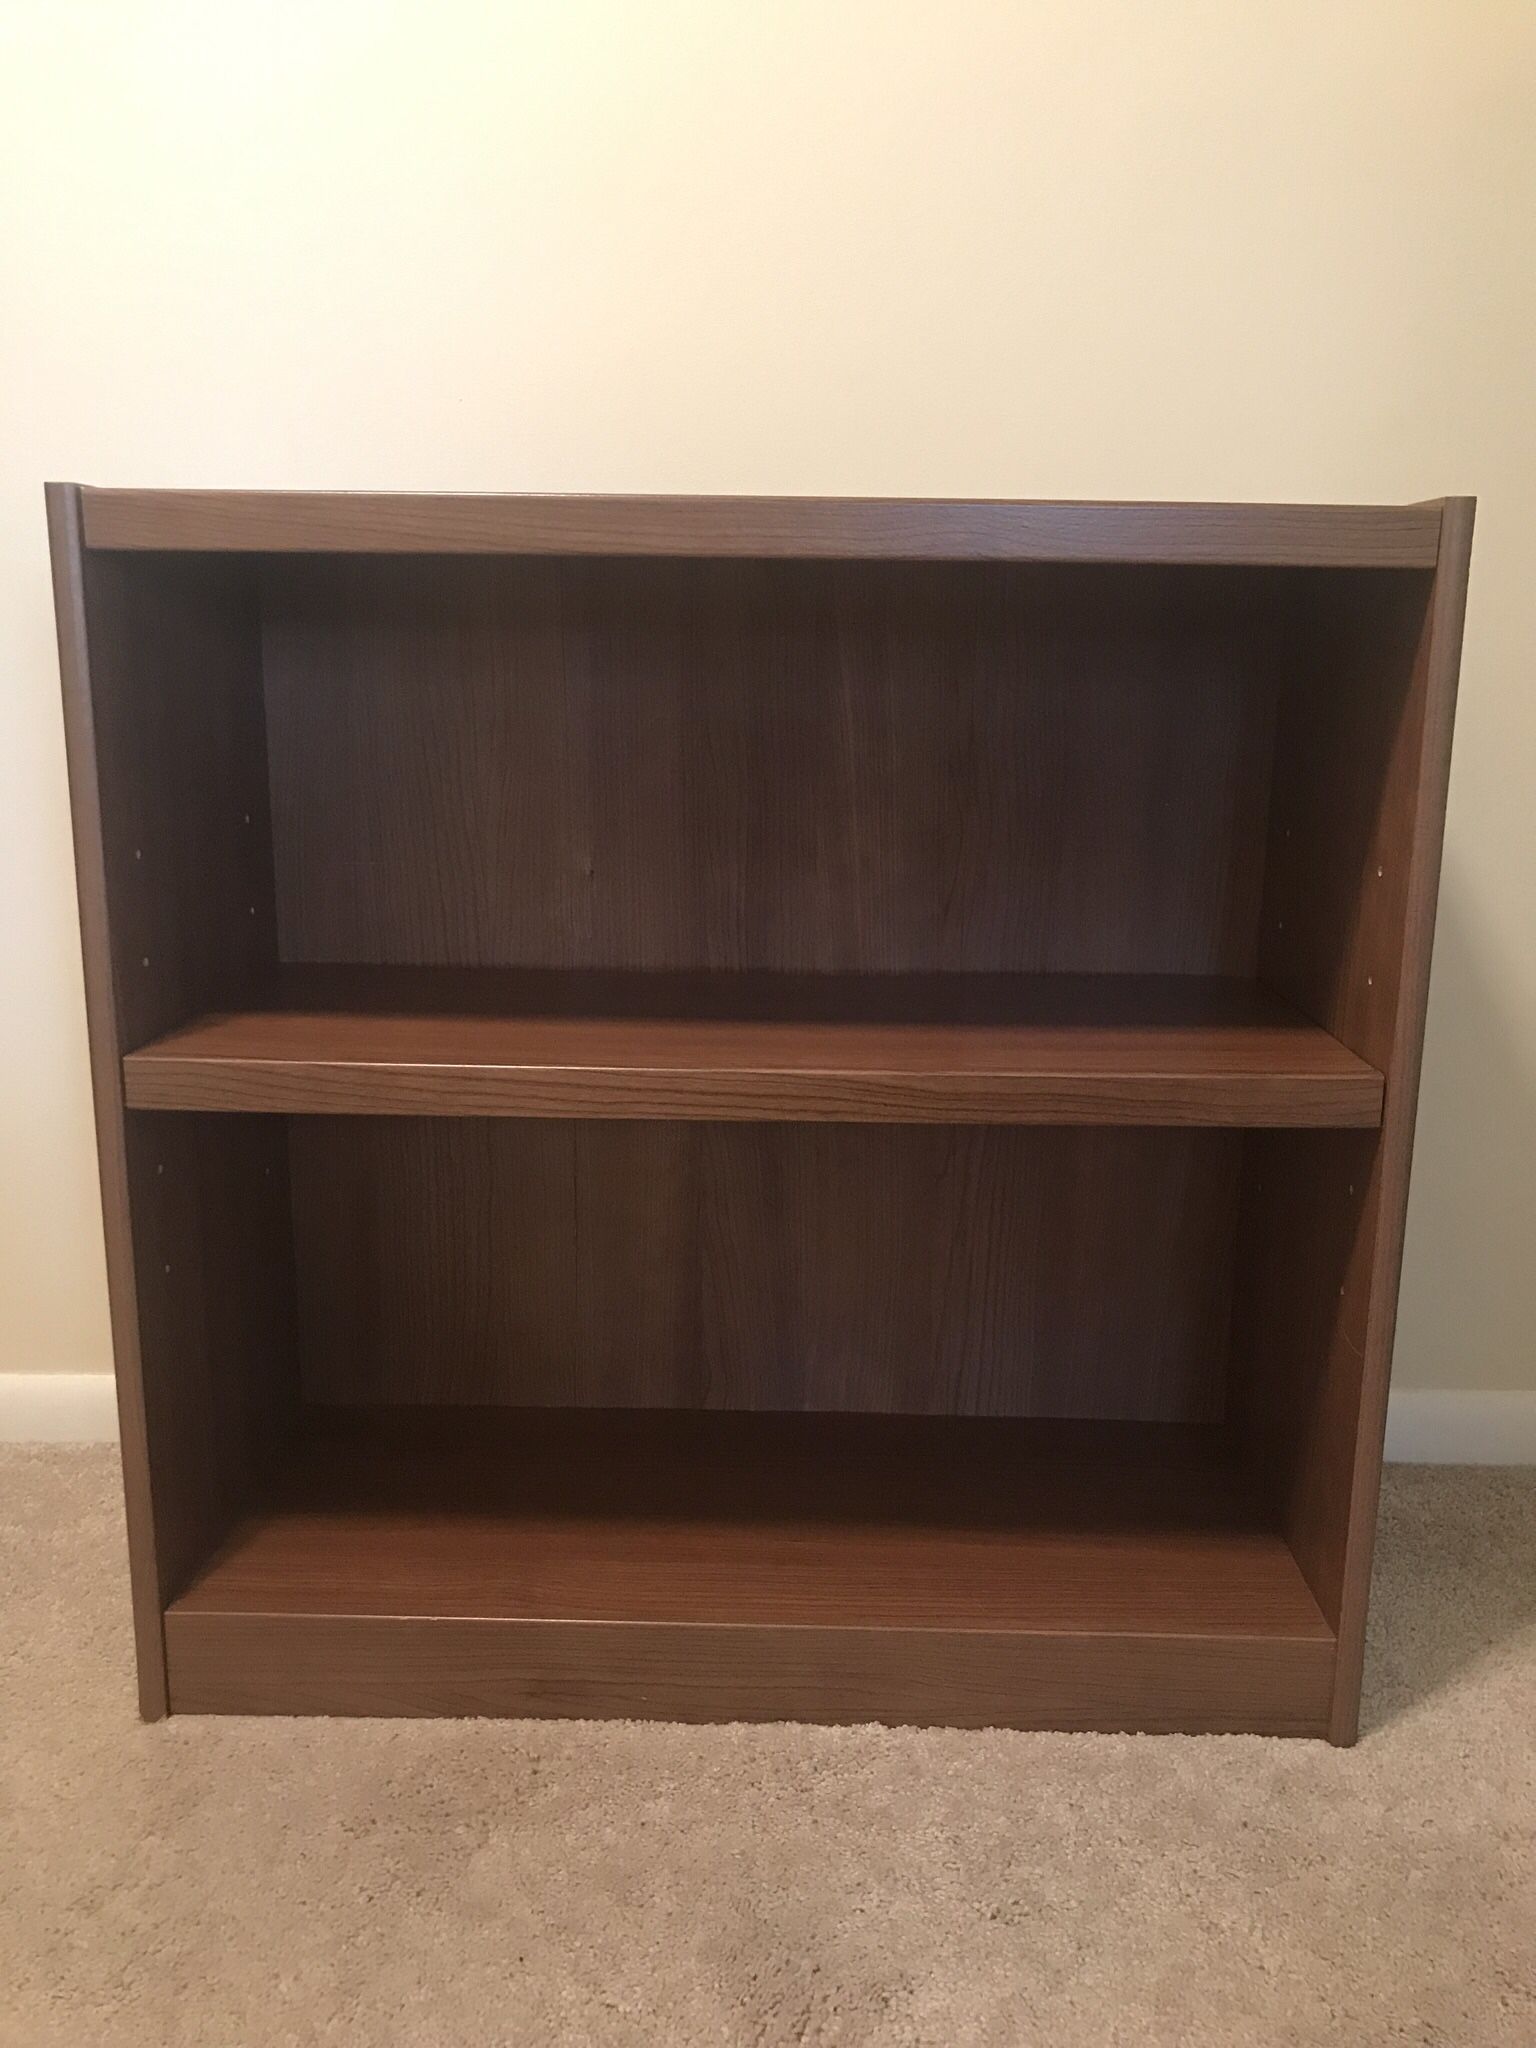 TWO SHELF STORAGE CABINET FOR BOOKS OR VINYL